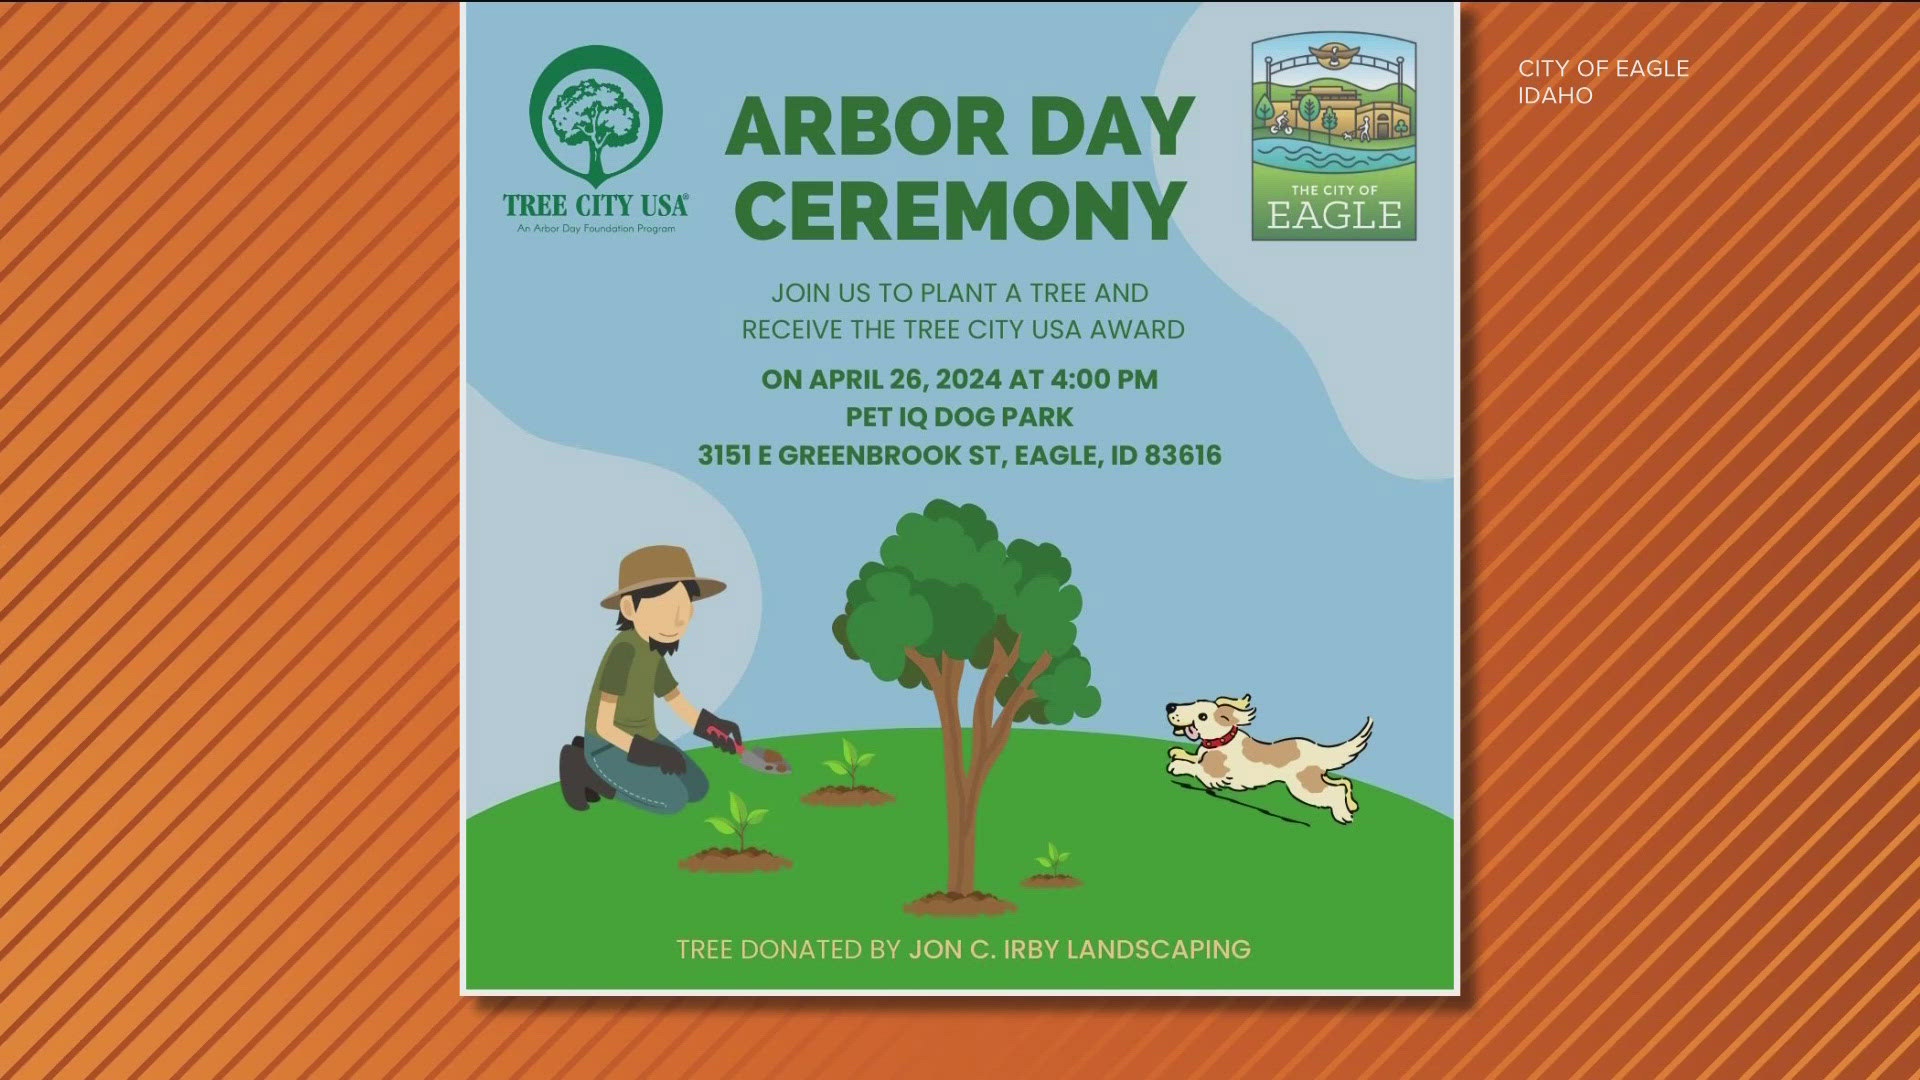 The event is at 4pm at the Petiq Dog Park in Eagle, located at 3151 East Greenbrook Street.